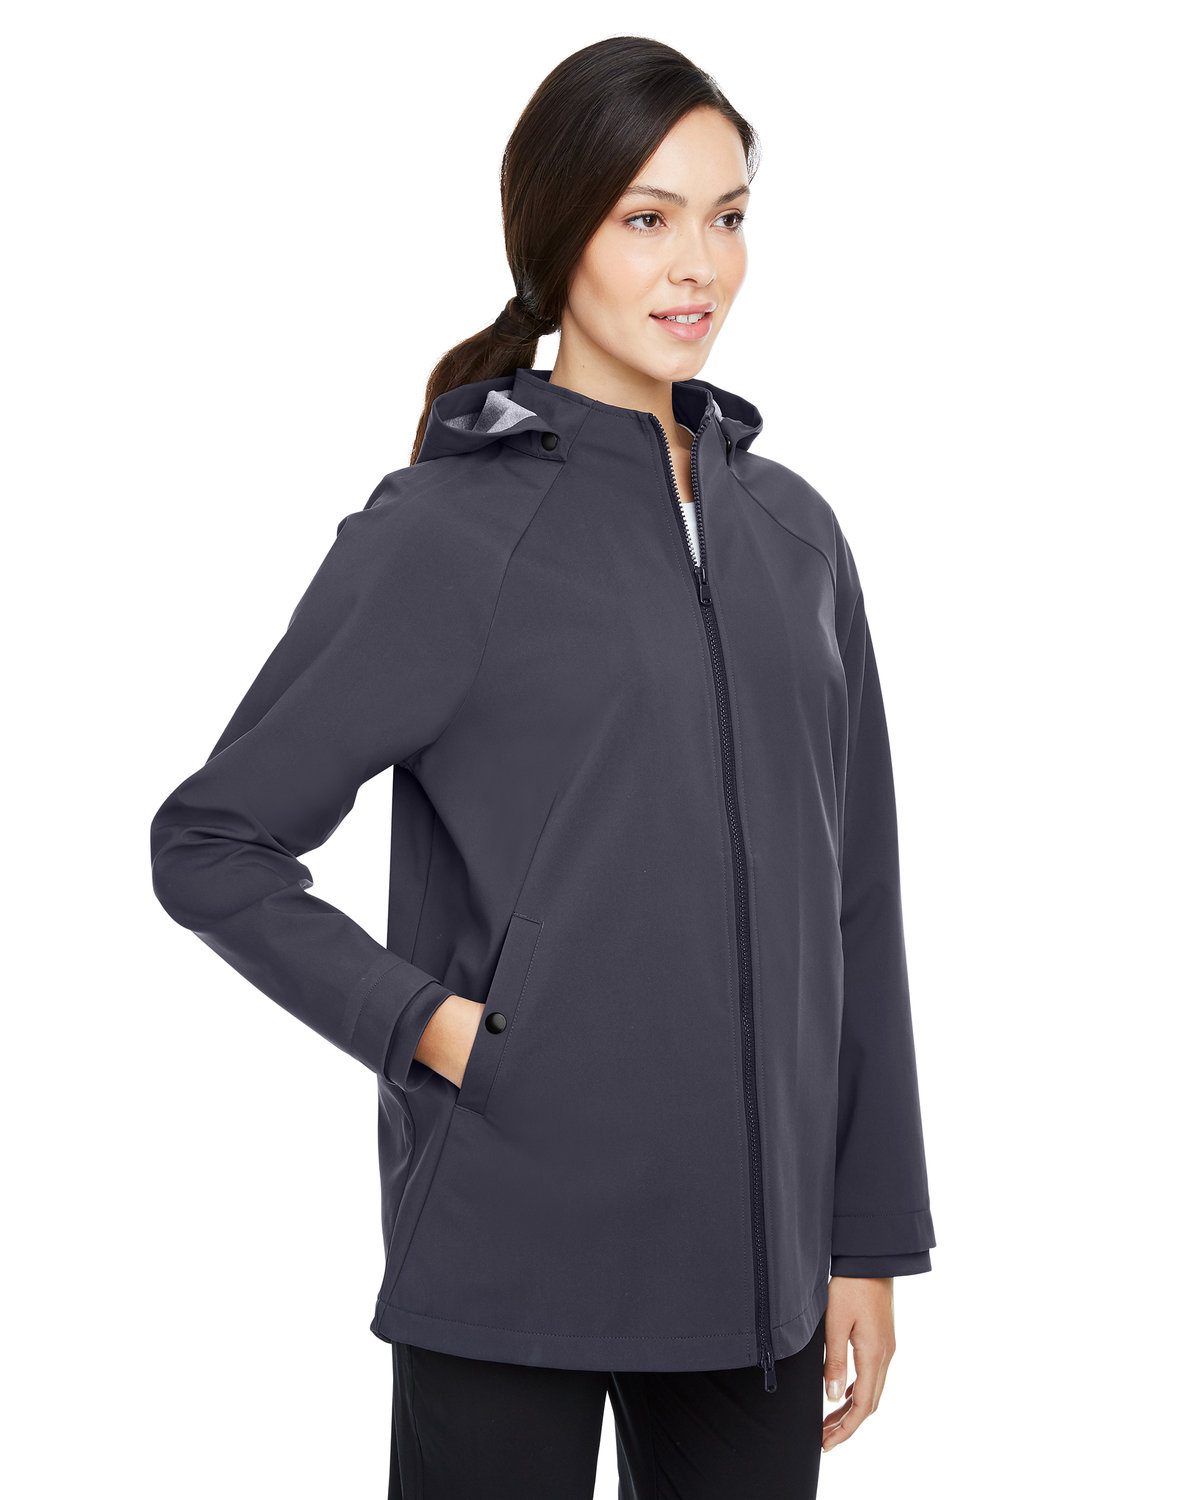 North End Ladies' City Hybrid Soft Shell Hooded Jacket | alphabroder